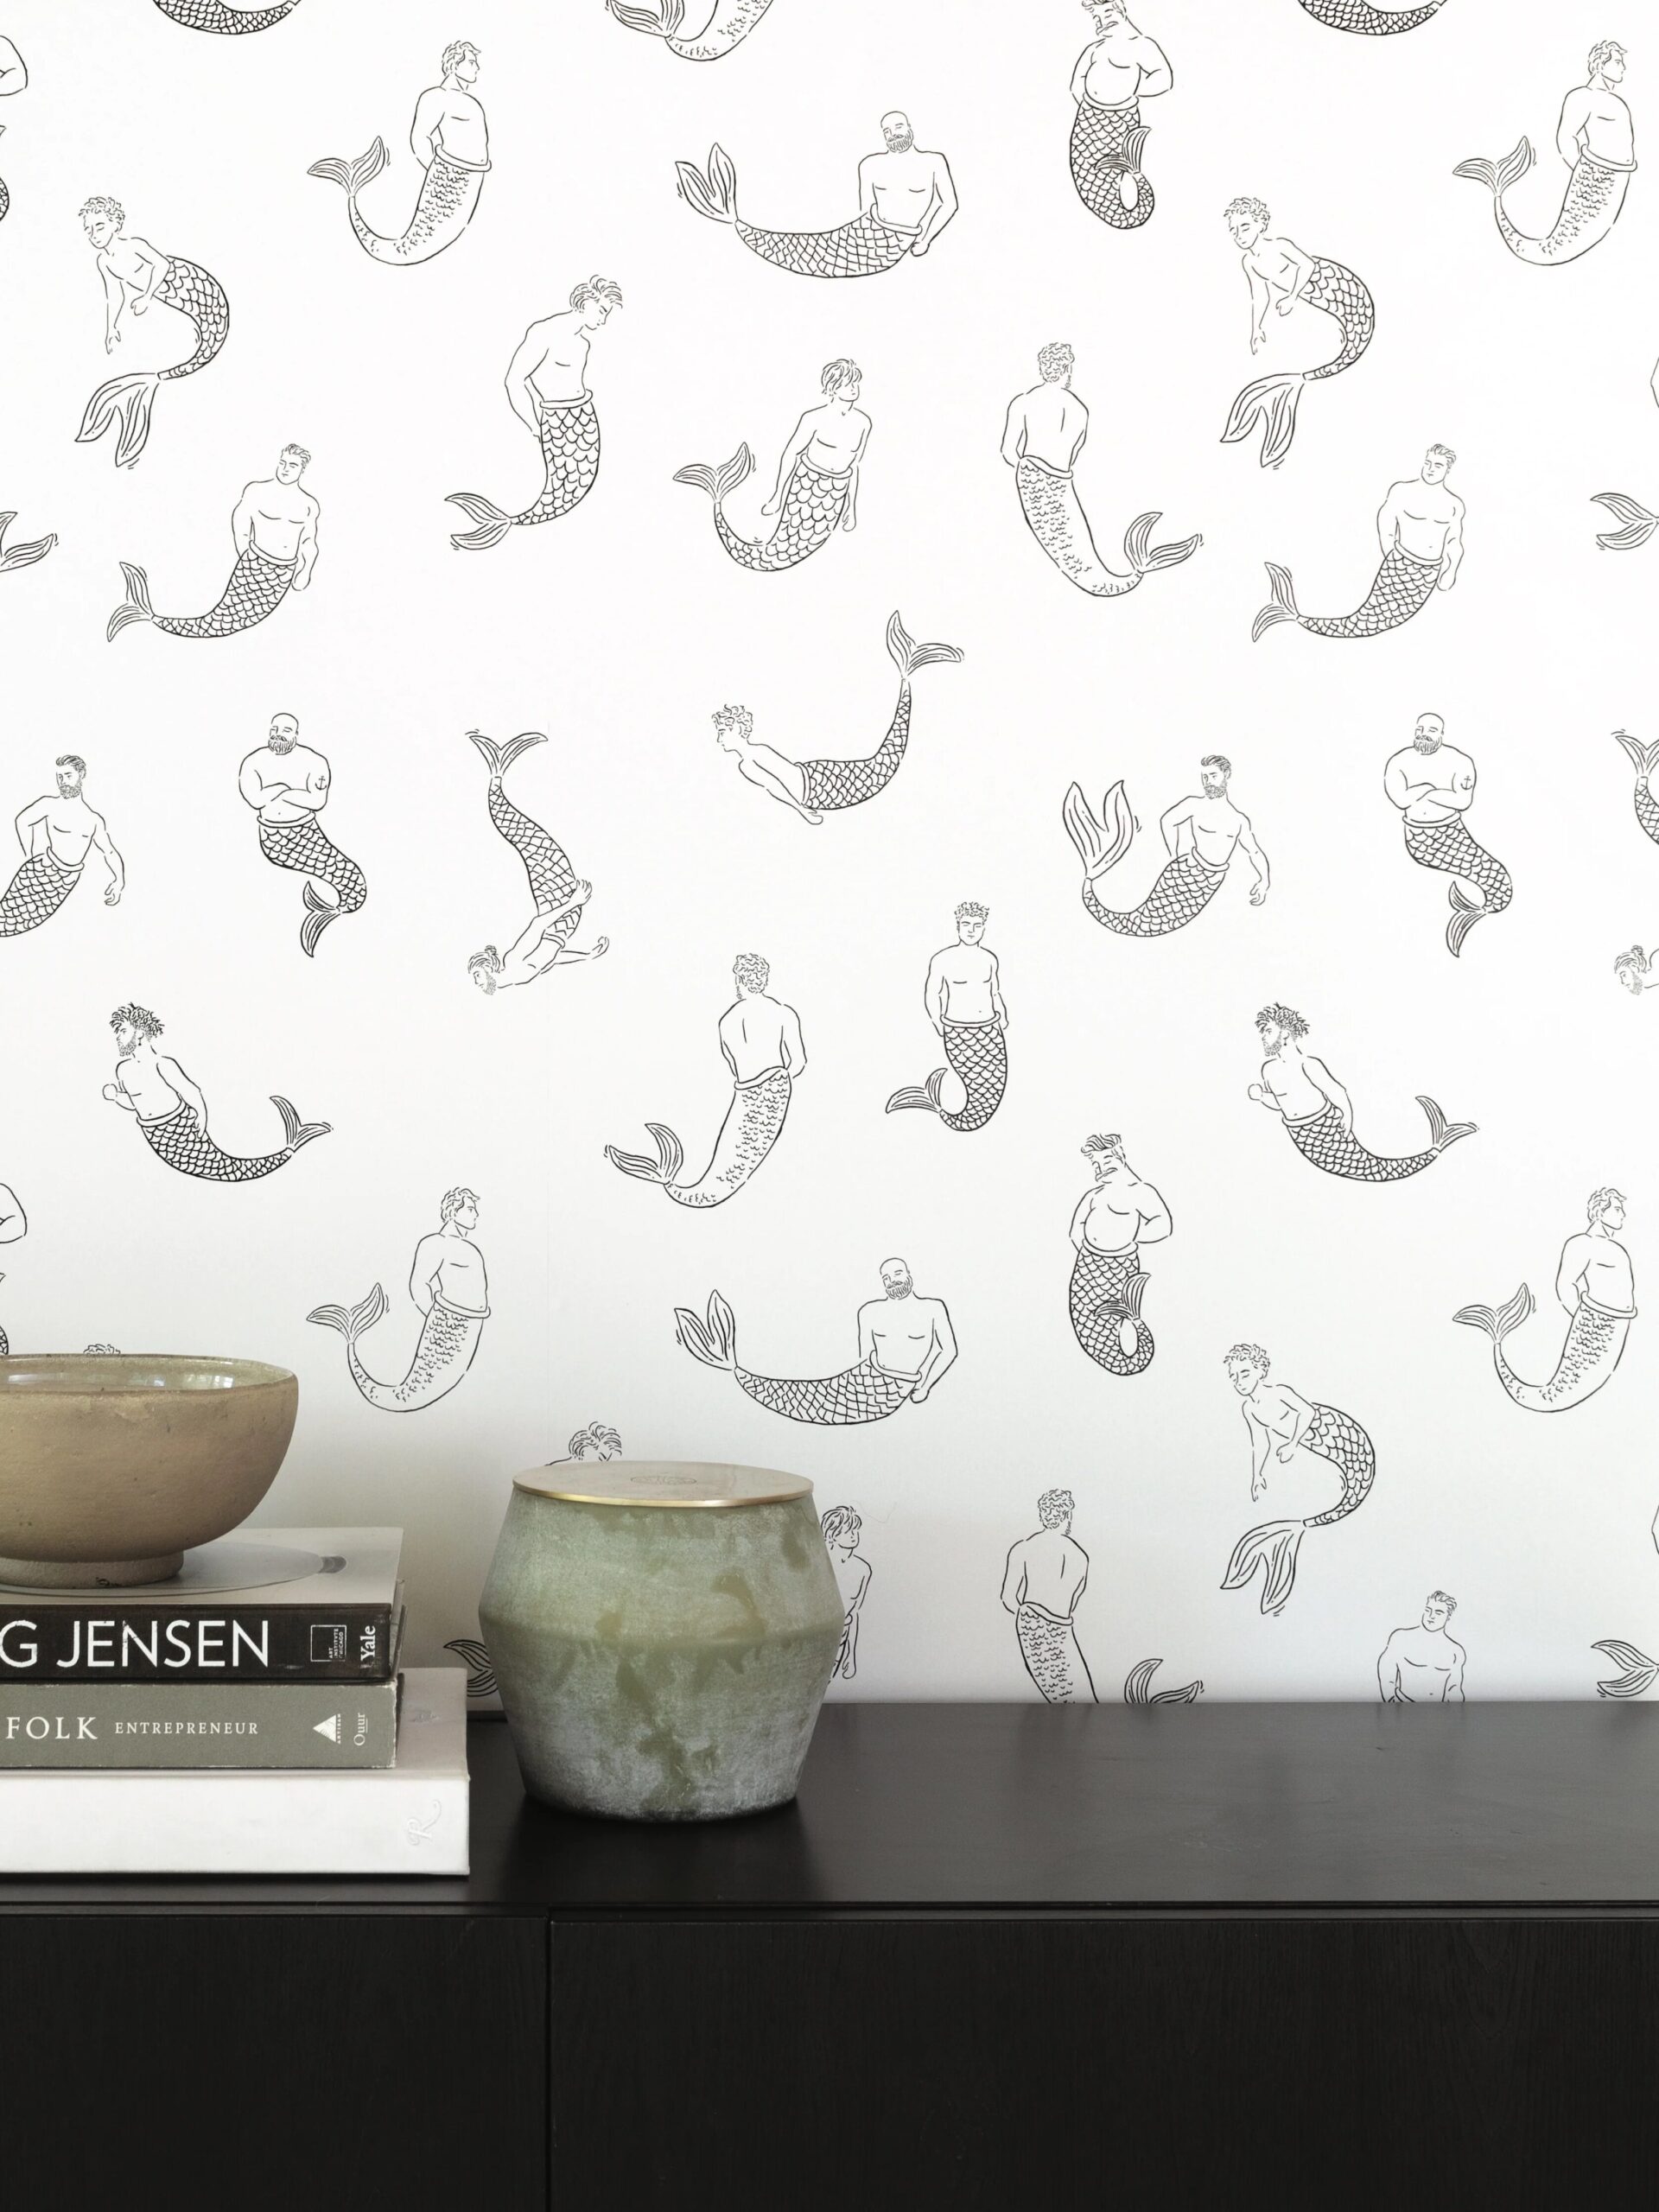 Wallpaper featuring a repeating pattern of mermaids, with a shelf holding a bowl, books, and a decorative stone object.